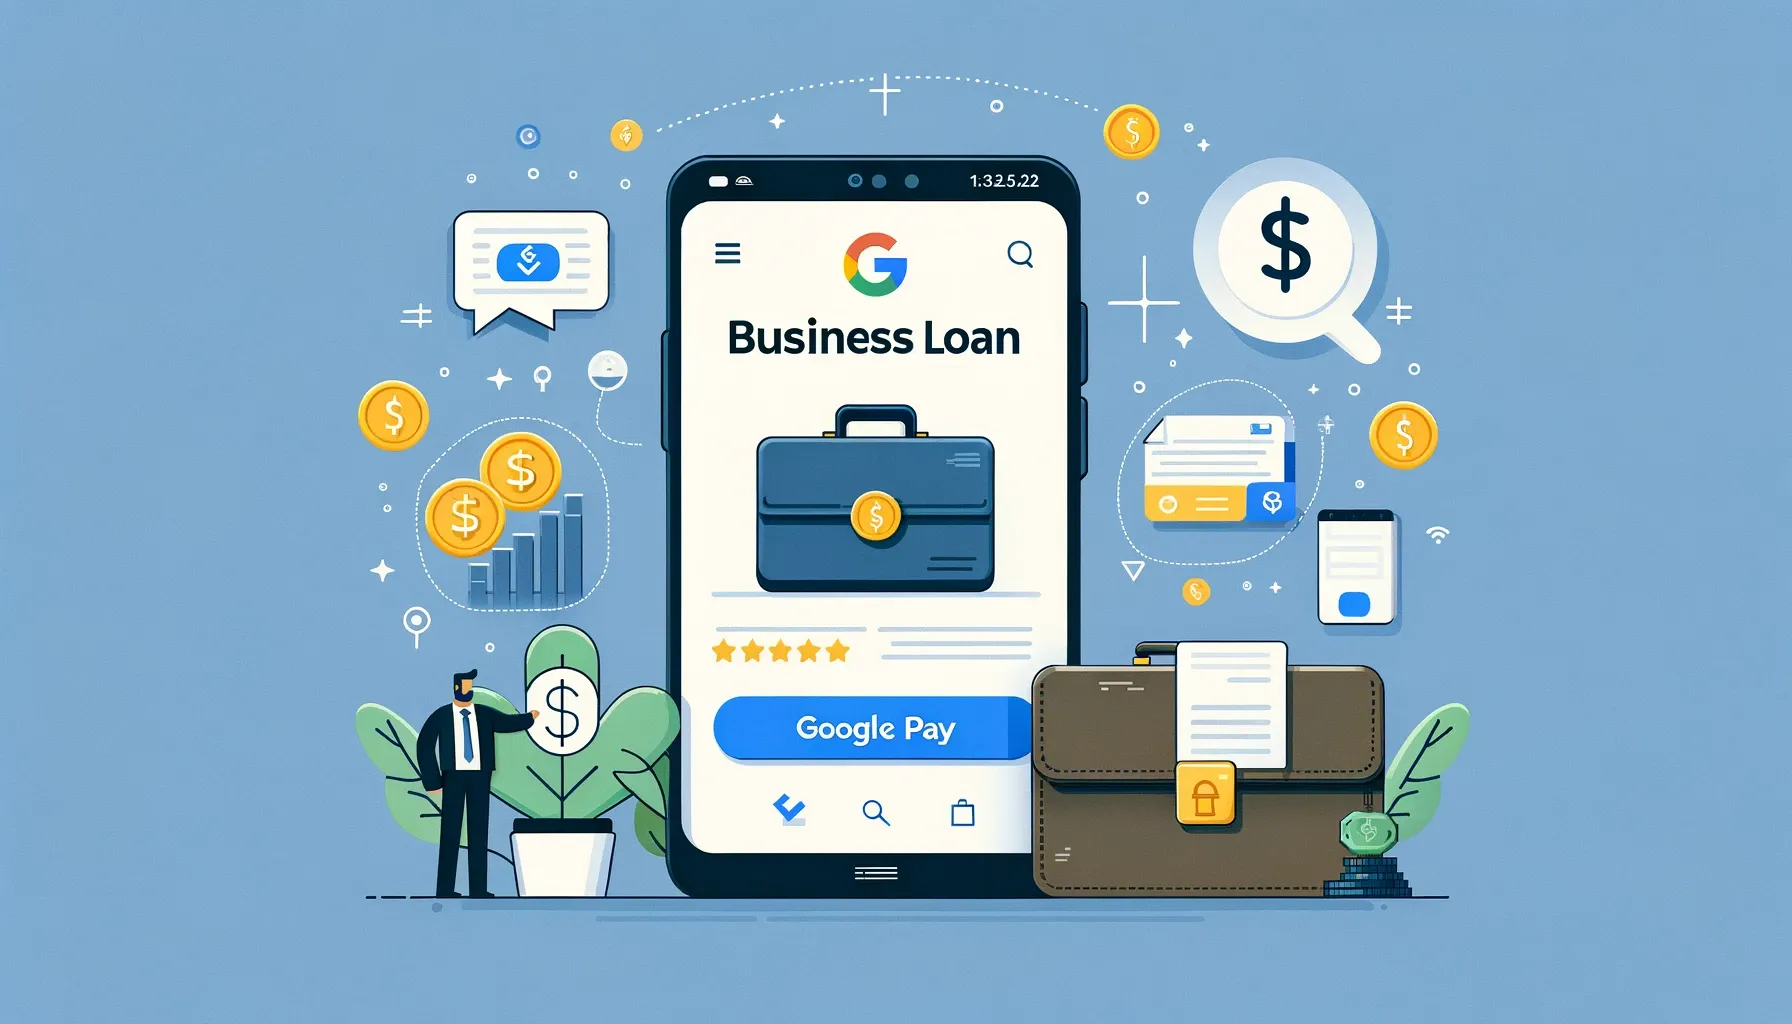 How to Apply Business loan from Google pay?